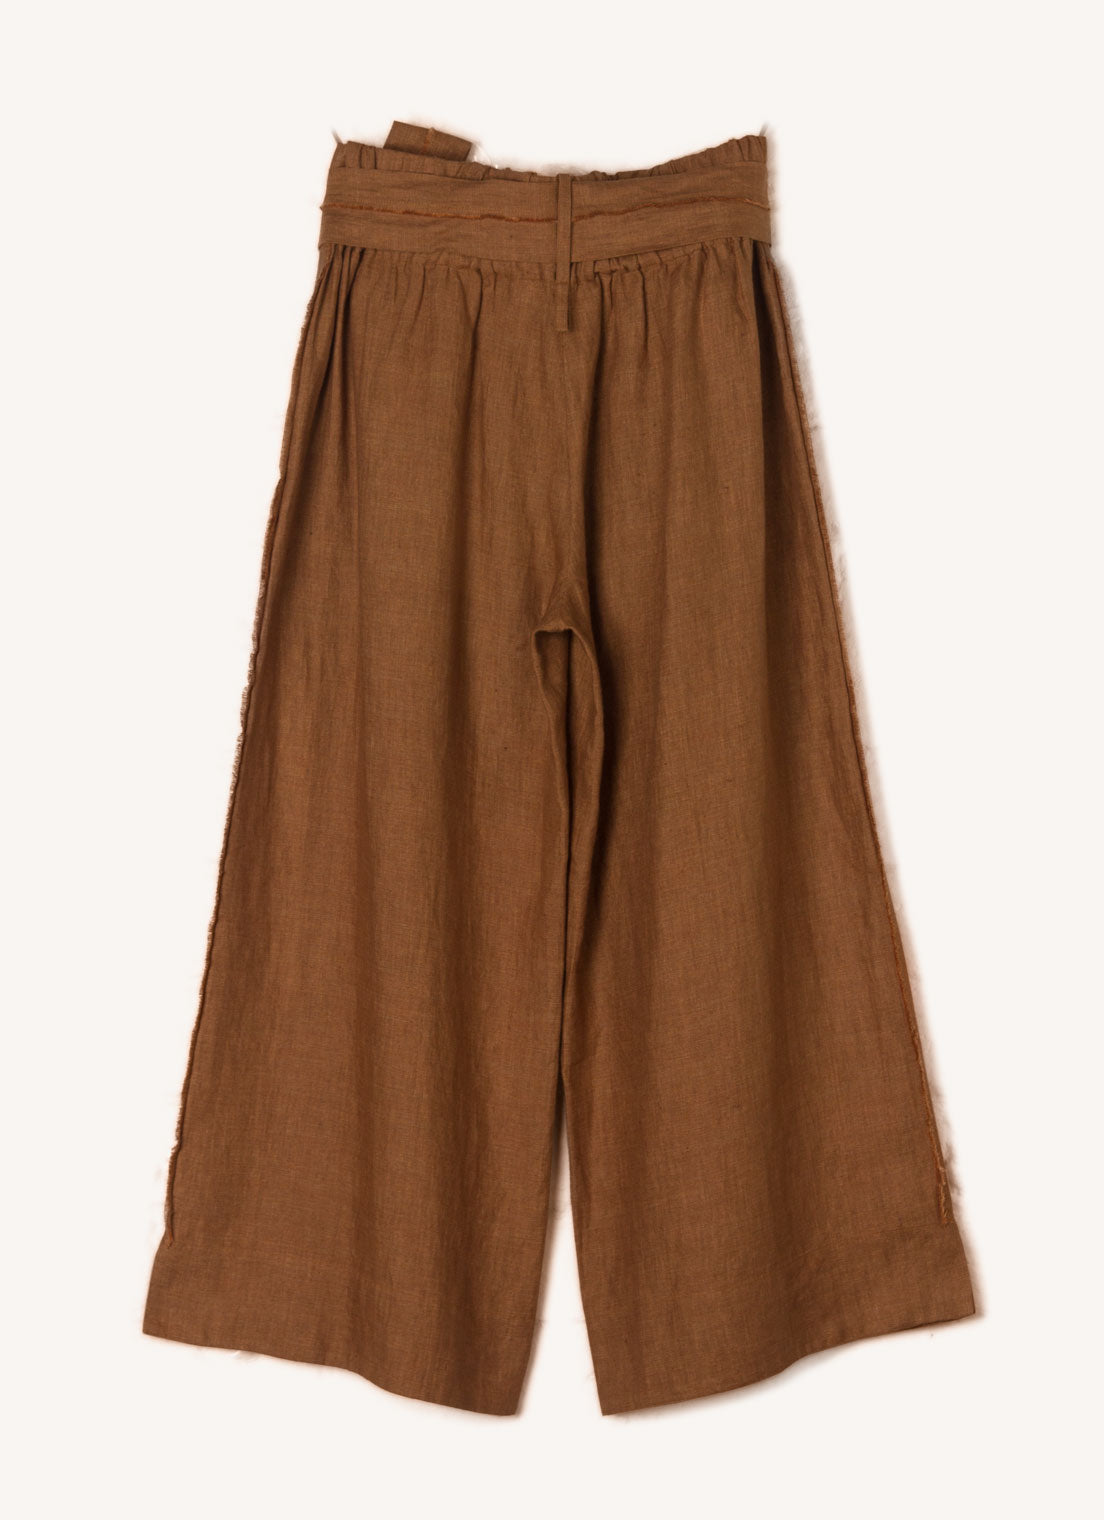 A bronze, loose fitting crop pants with elasticated back waistband, hand frayed detailing and tie belt of the same fabric